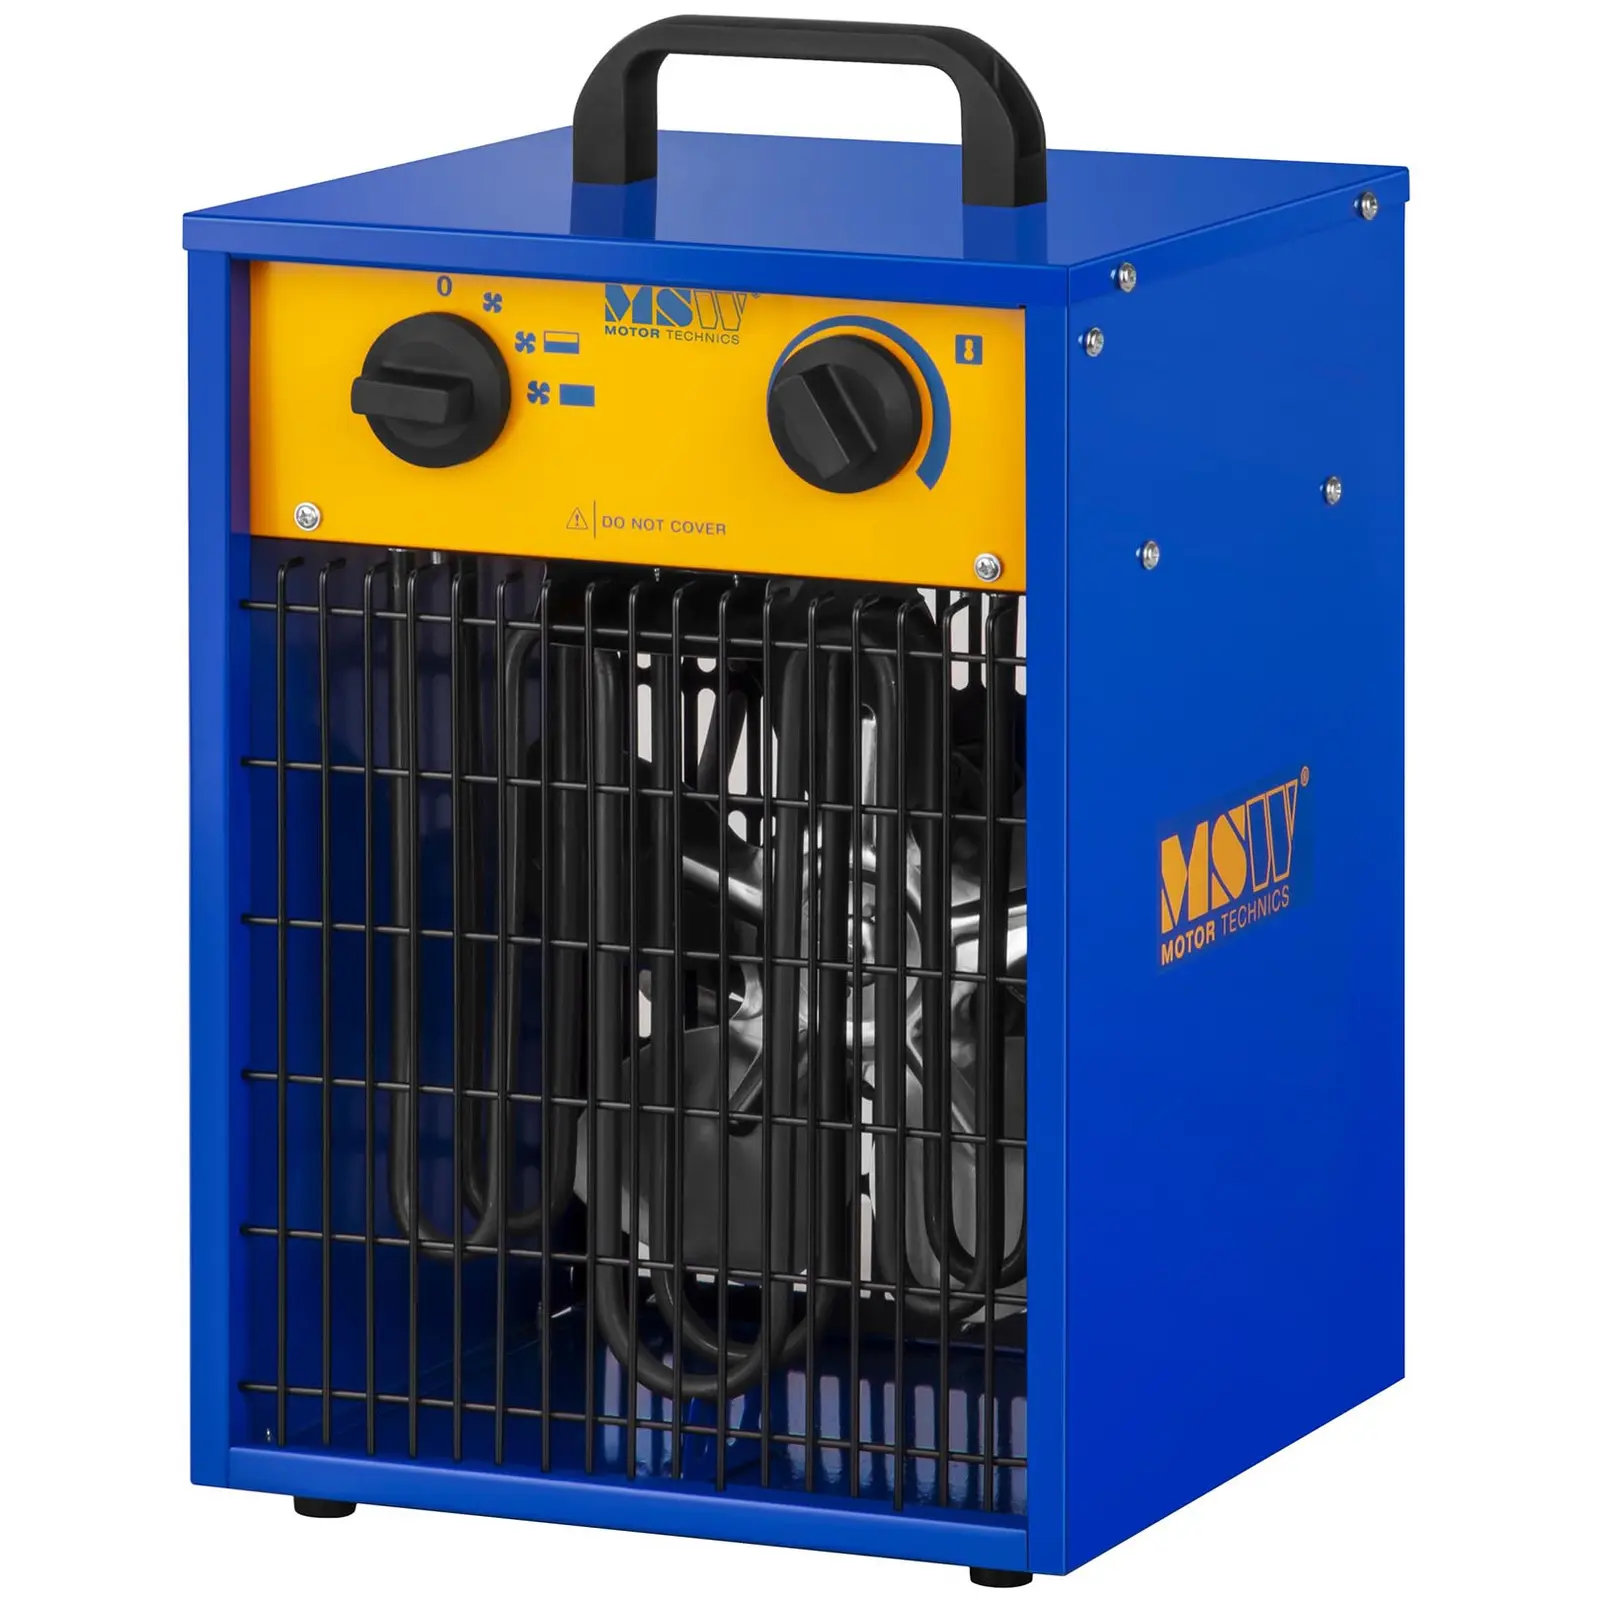 Factory second Industrial Electric Heater with Cooling Function - 0 to 85 °C - 3,300 W